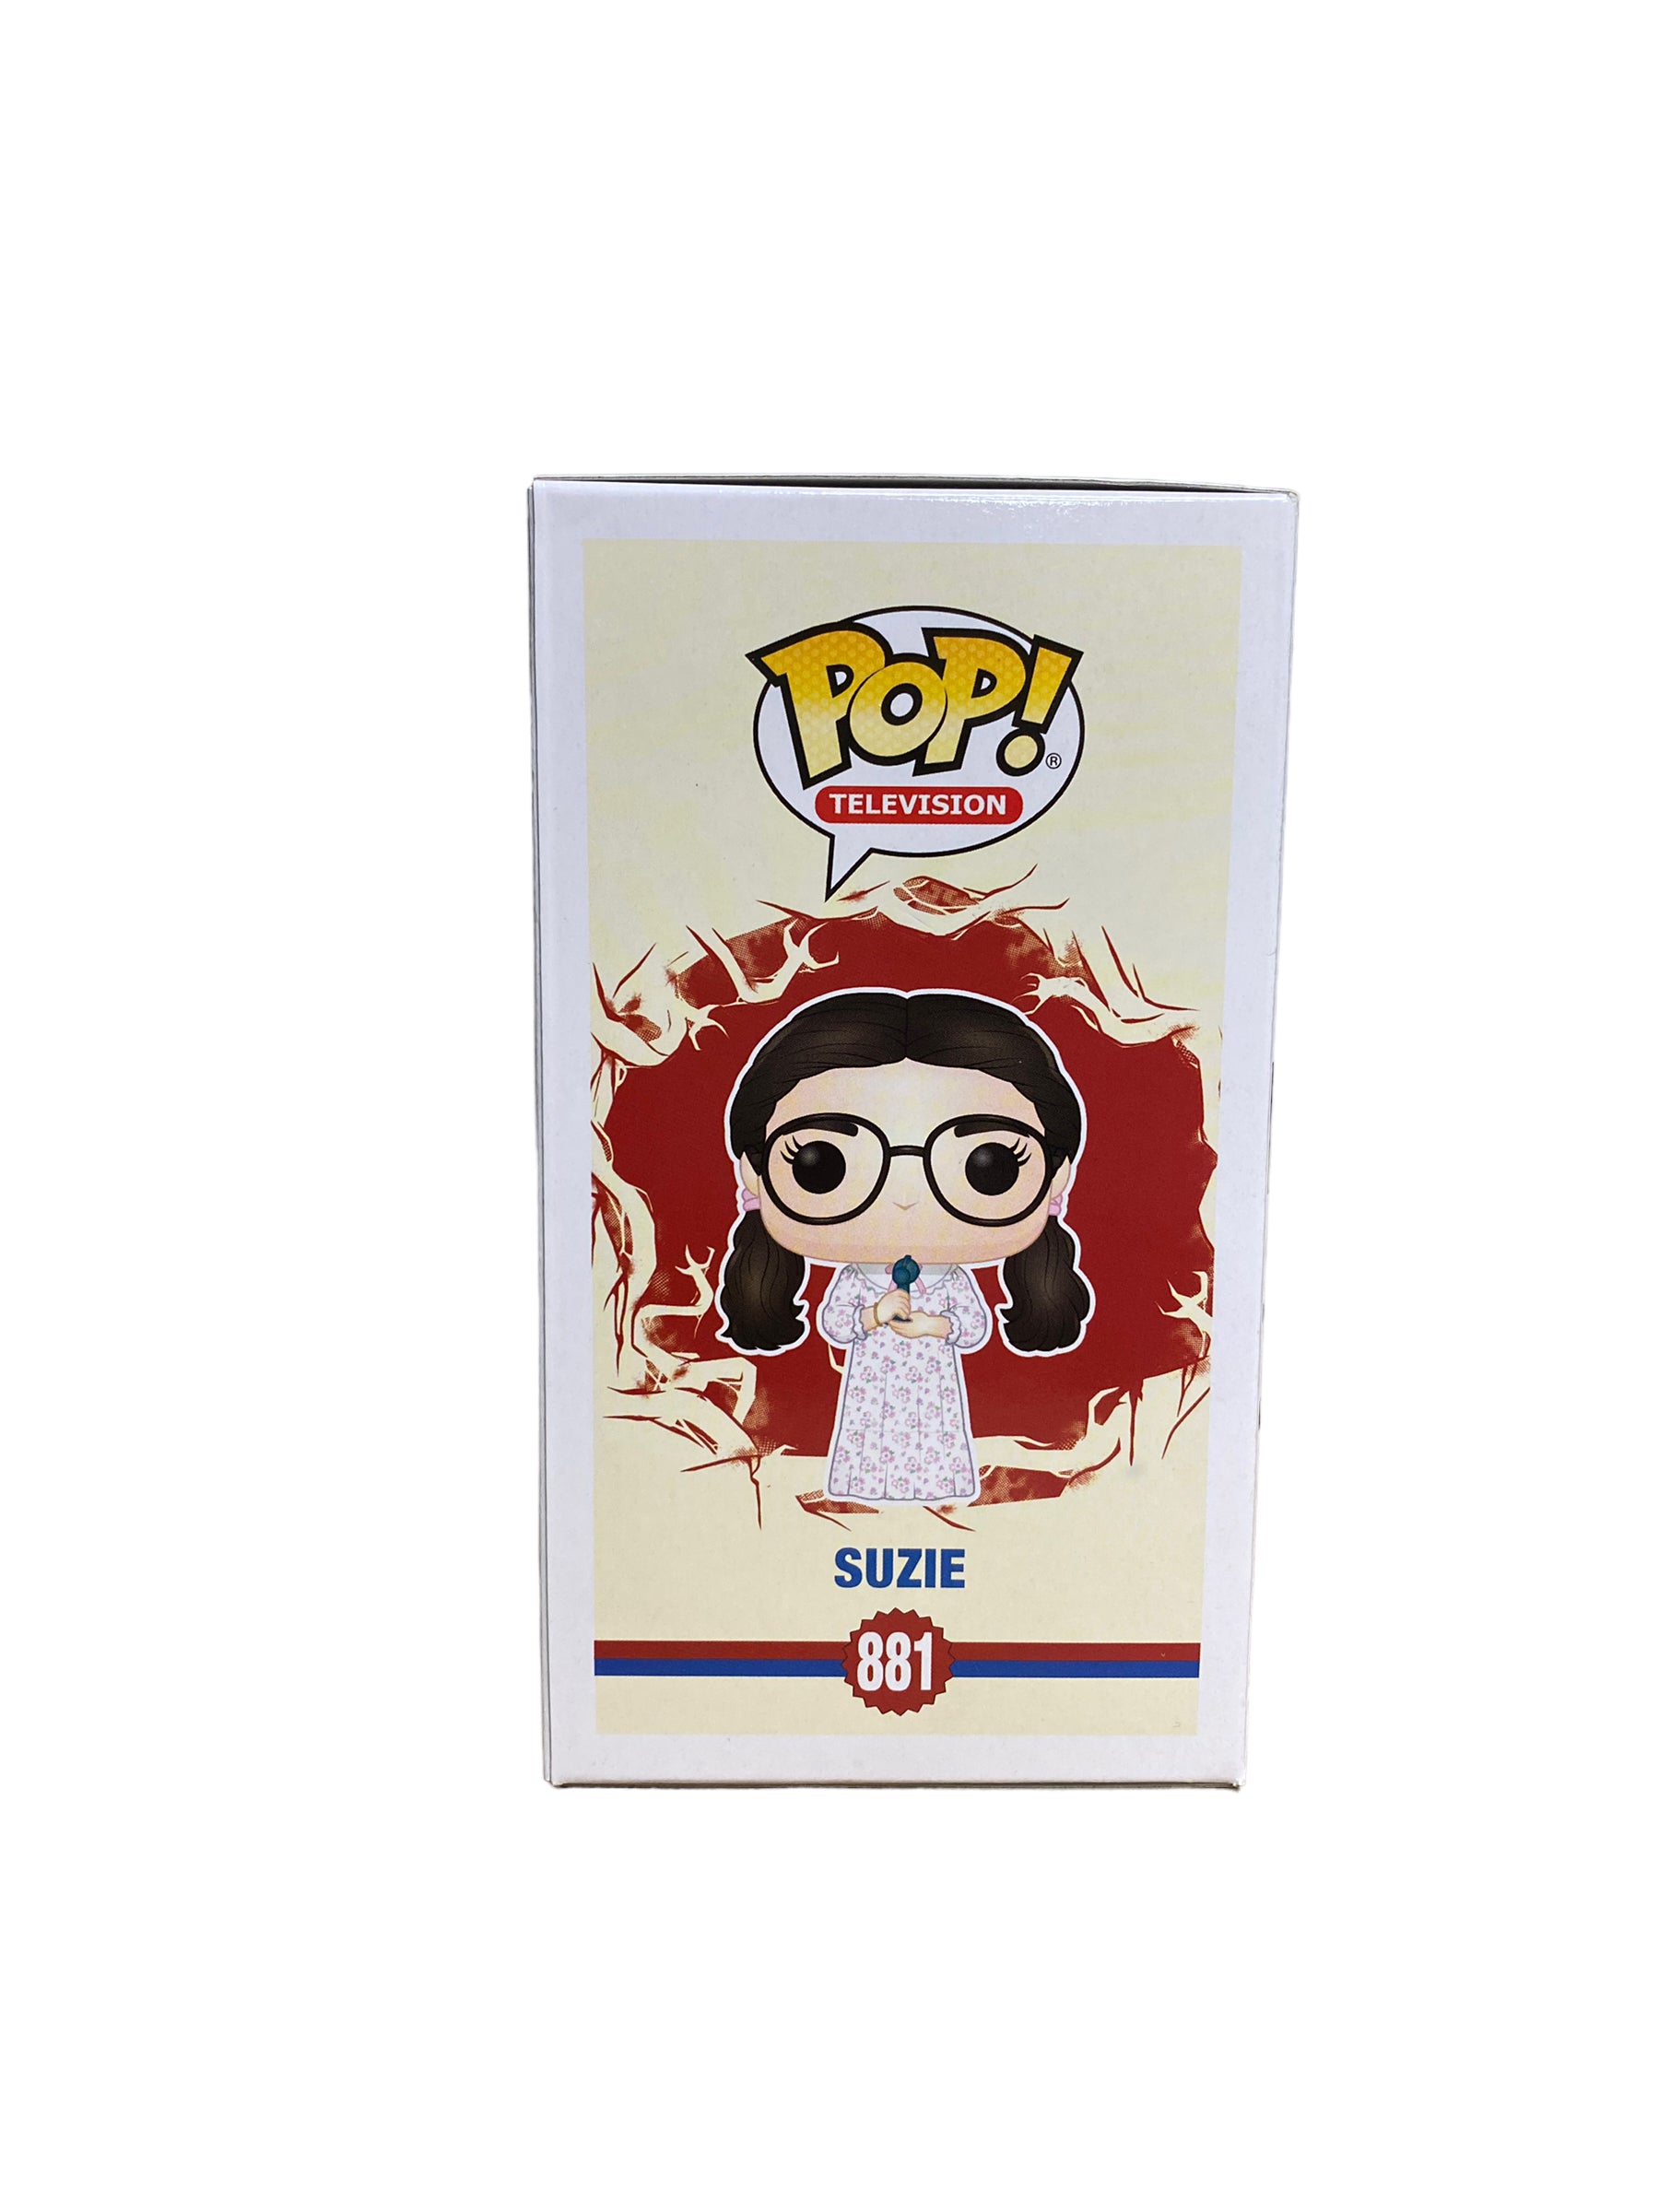 Suzie #881 Funko Pop! - Stranger Things - NYCC 2019 Shared Exclusive - Condition 8.75/10